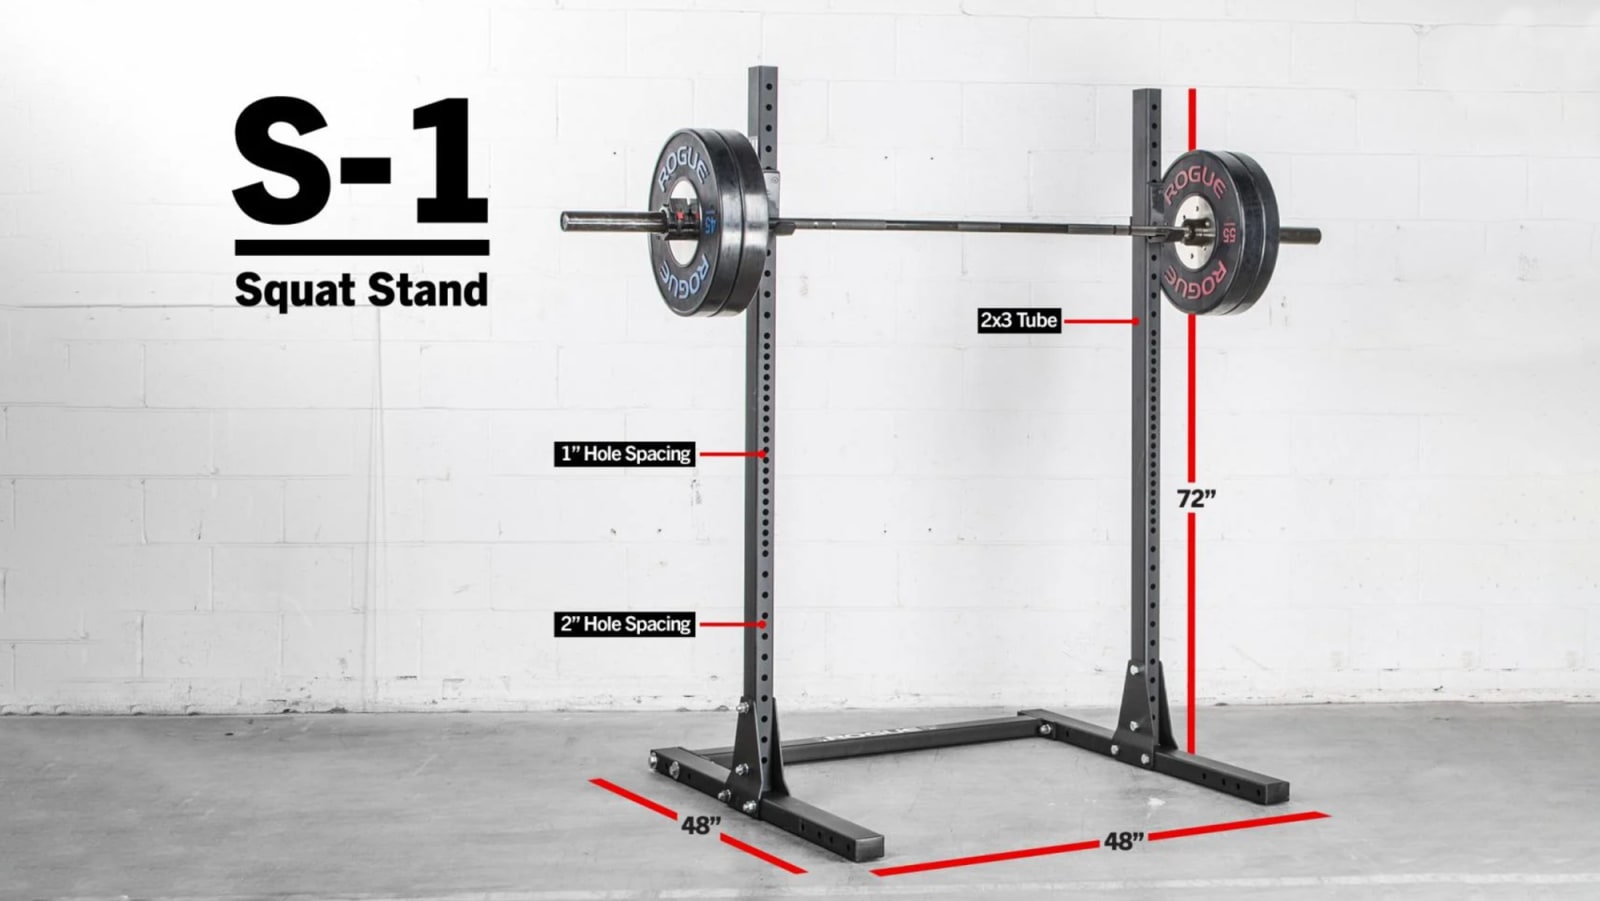 Rogue S-1 Squat Stand - Weight Training 72" Squat | Fitness